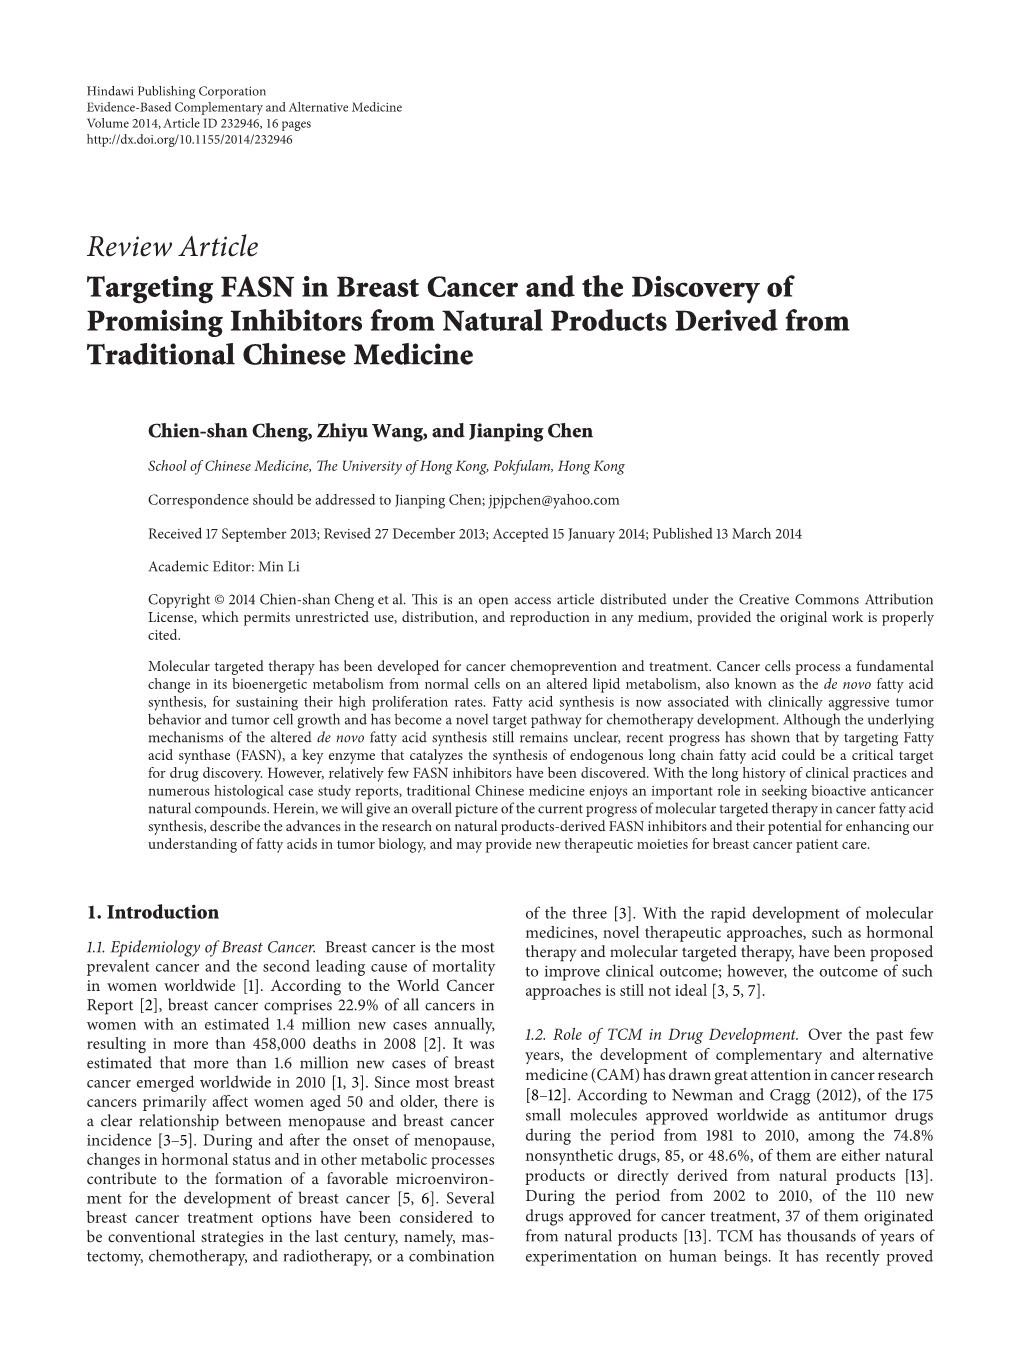 Review Article Targeting FASN in Breast Cancer and the Discovery of Promising Inhibitors from Natural Products Derived from Traditional Chinese Medicine